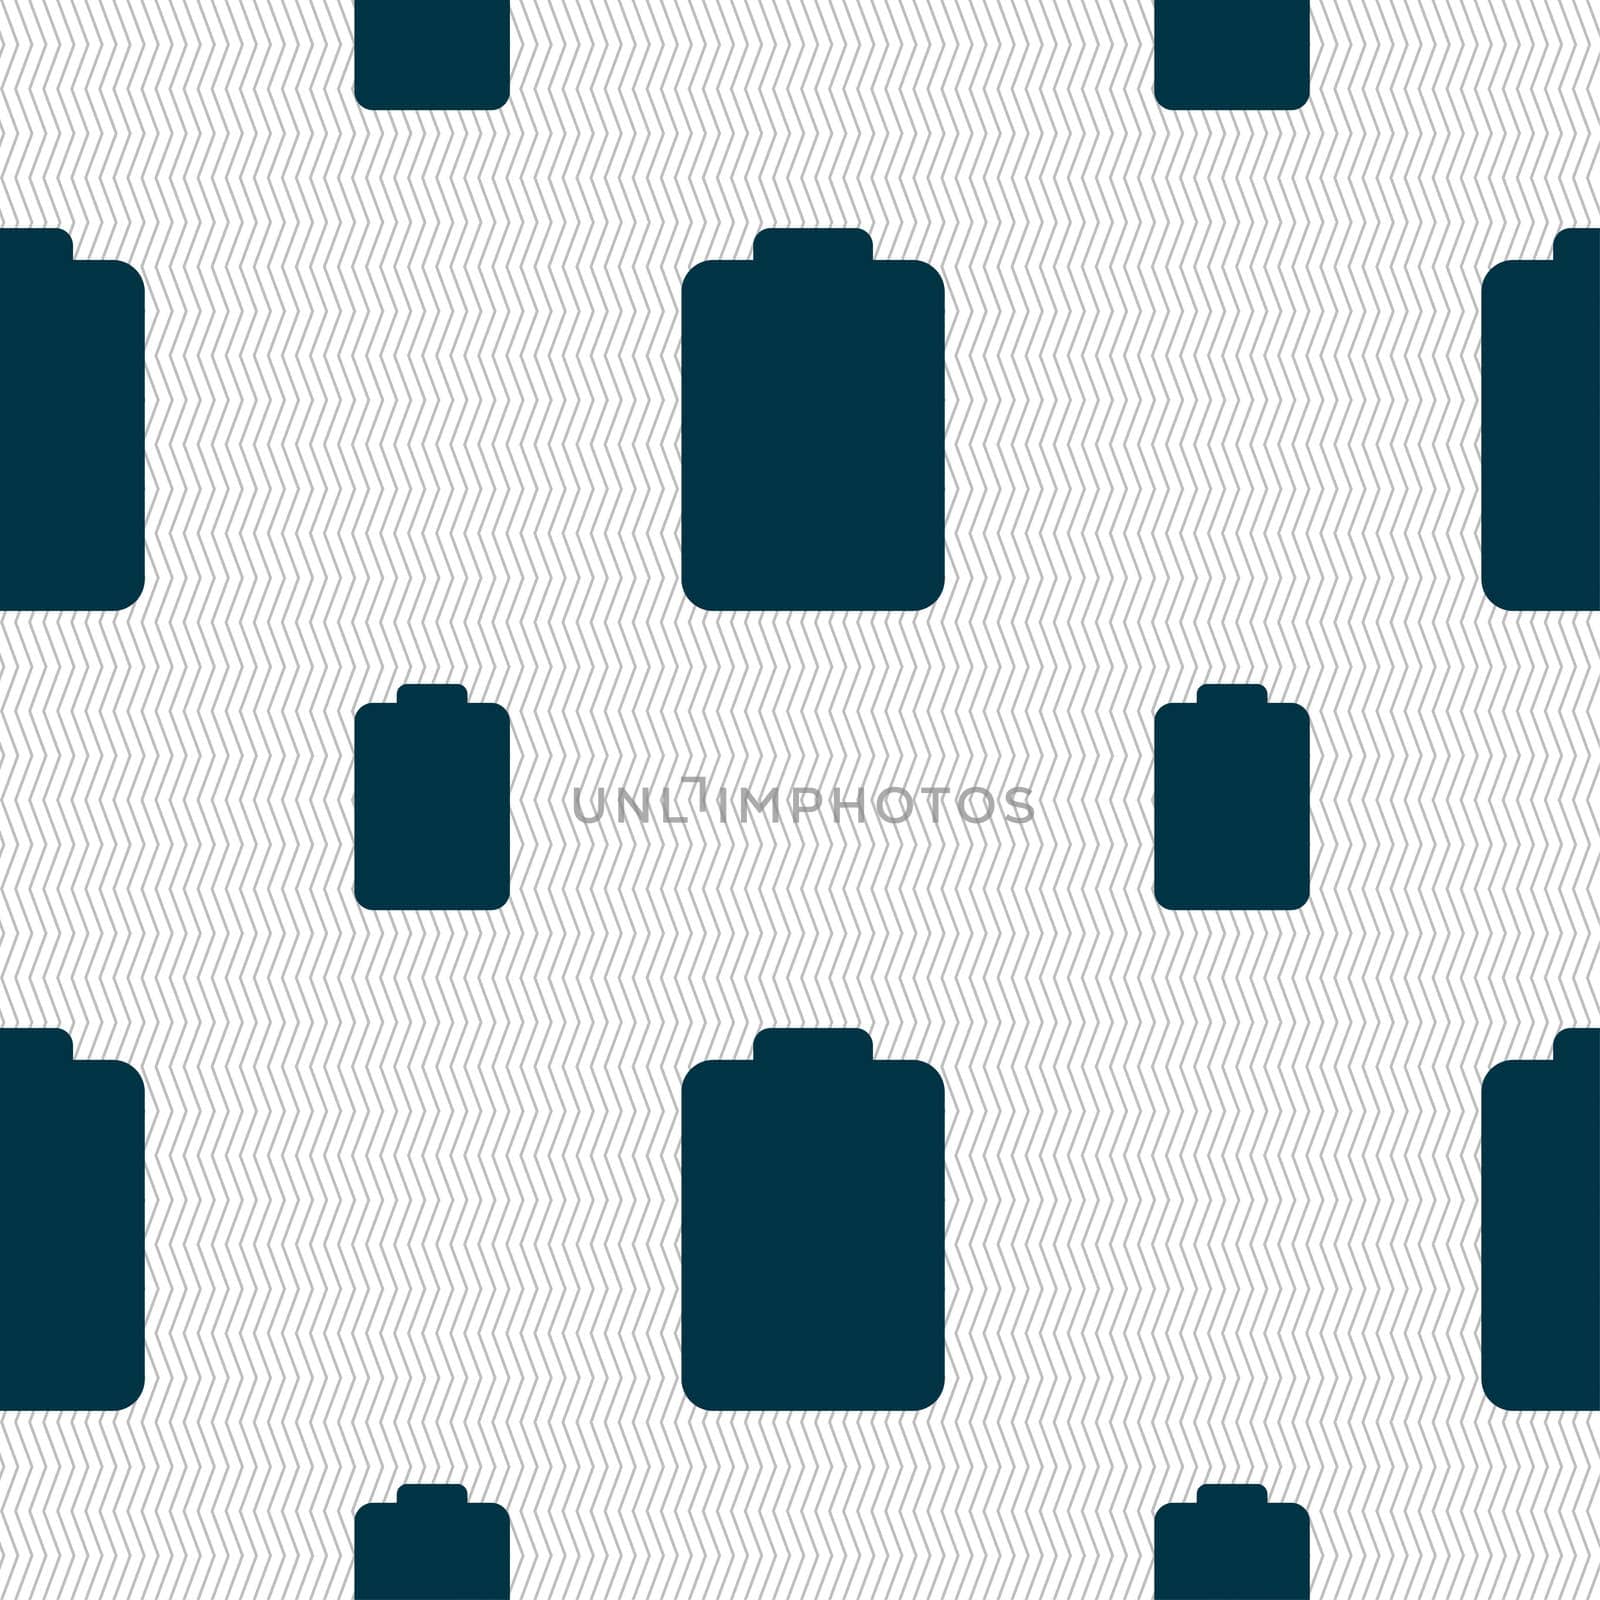 Battery empty, Low electricity icon sign. Seamless pattern with geometric texture. illustration